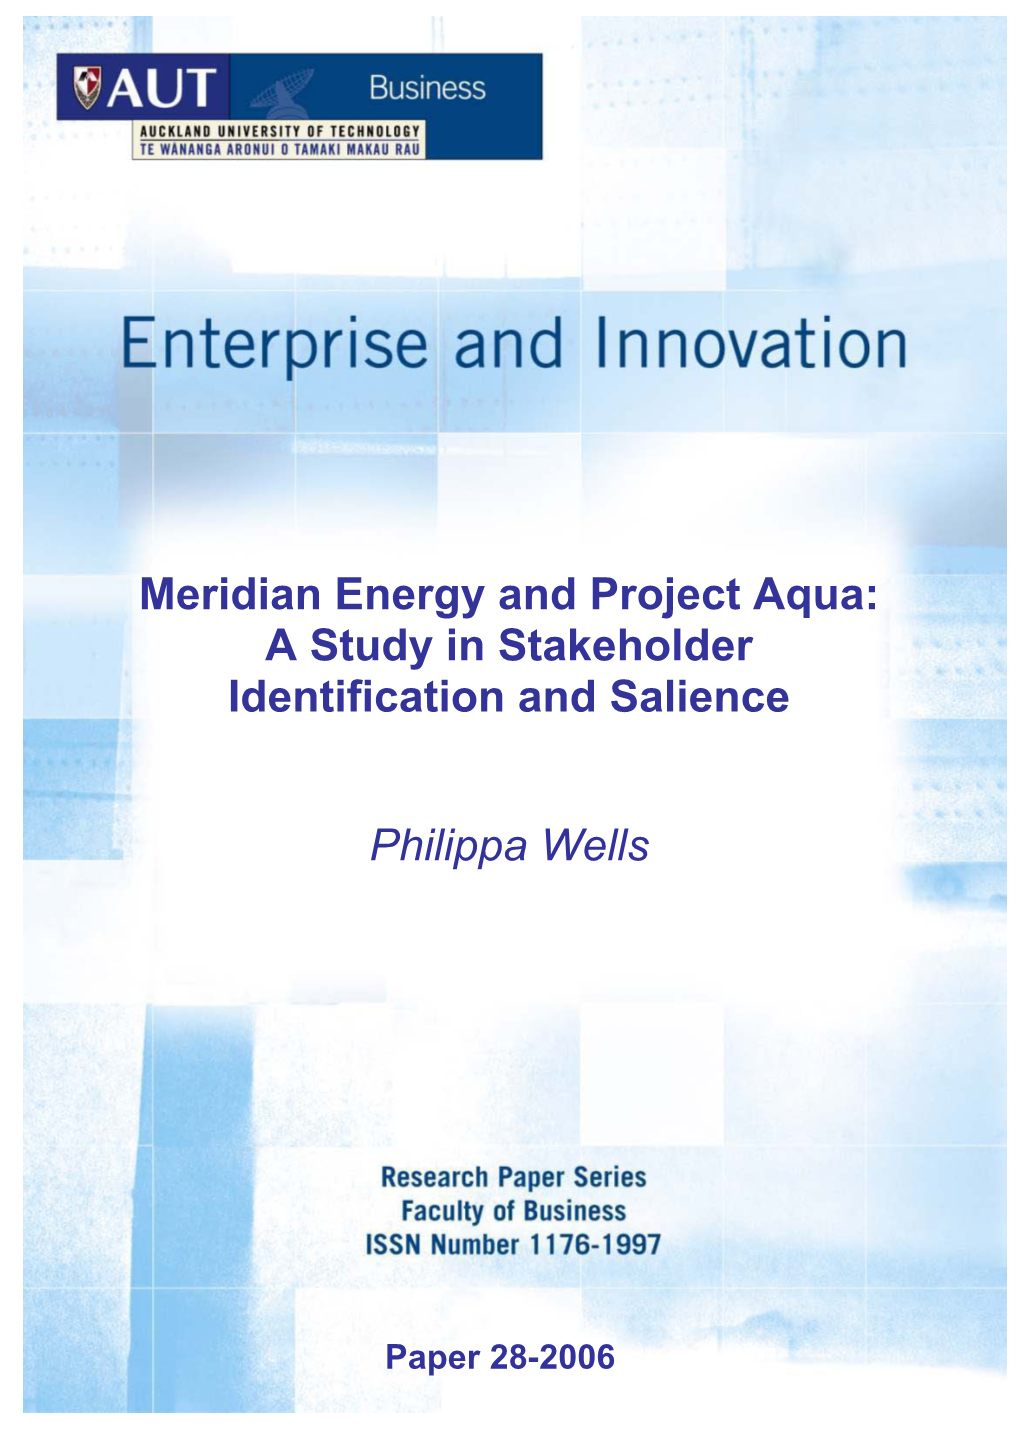 Meridian Energy and Project Aqua: a Study in Stakeholder Identification and Salience